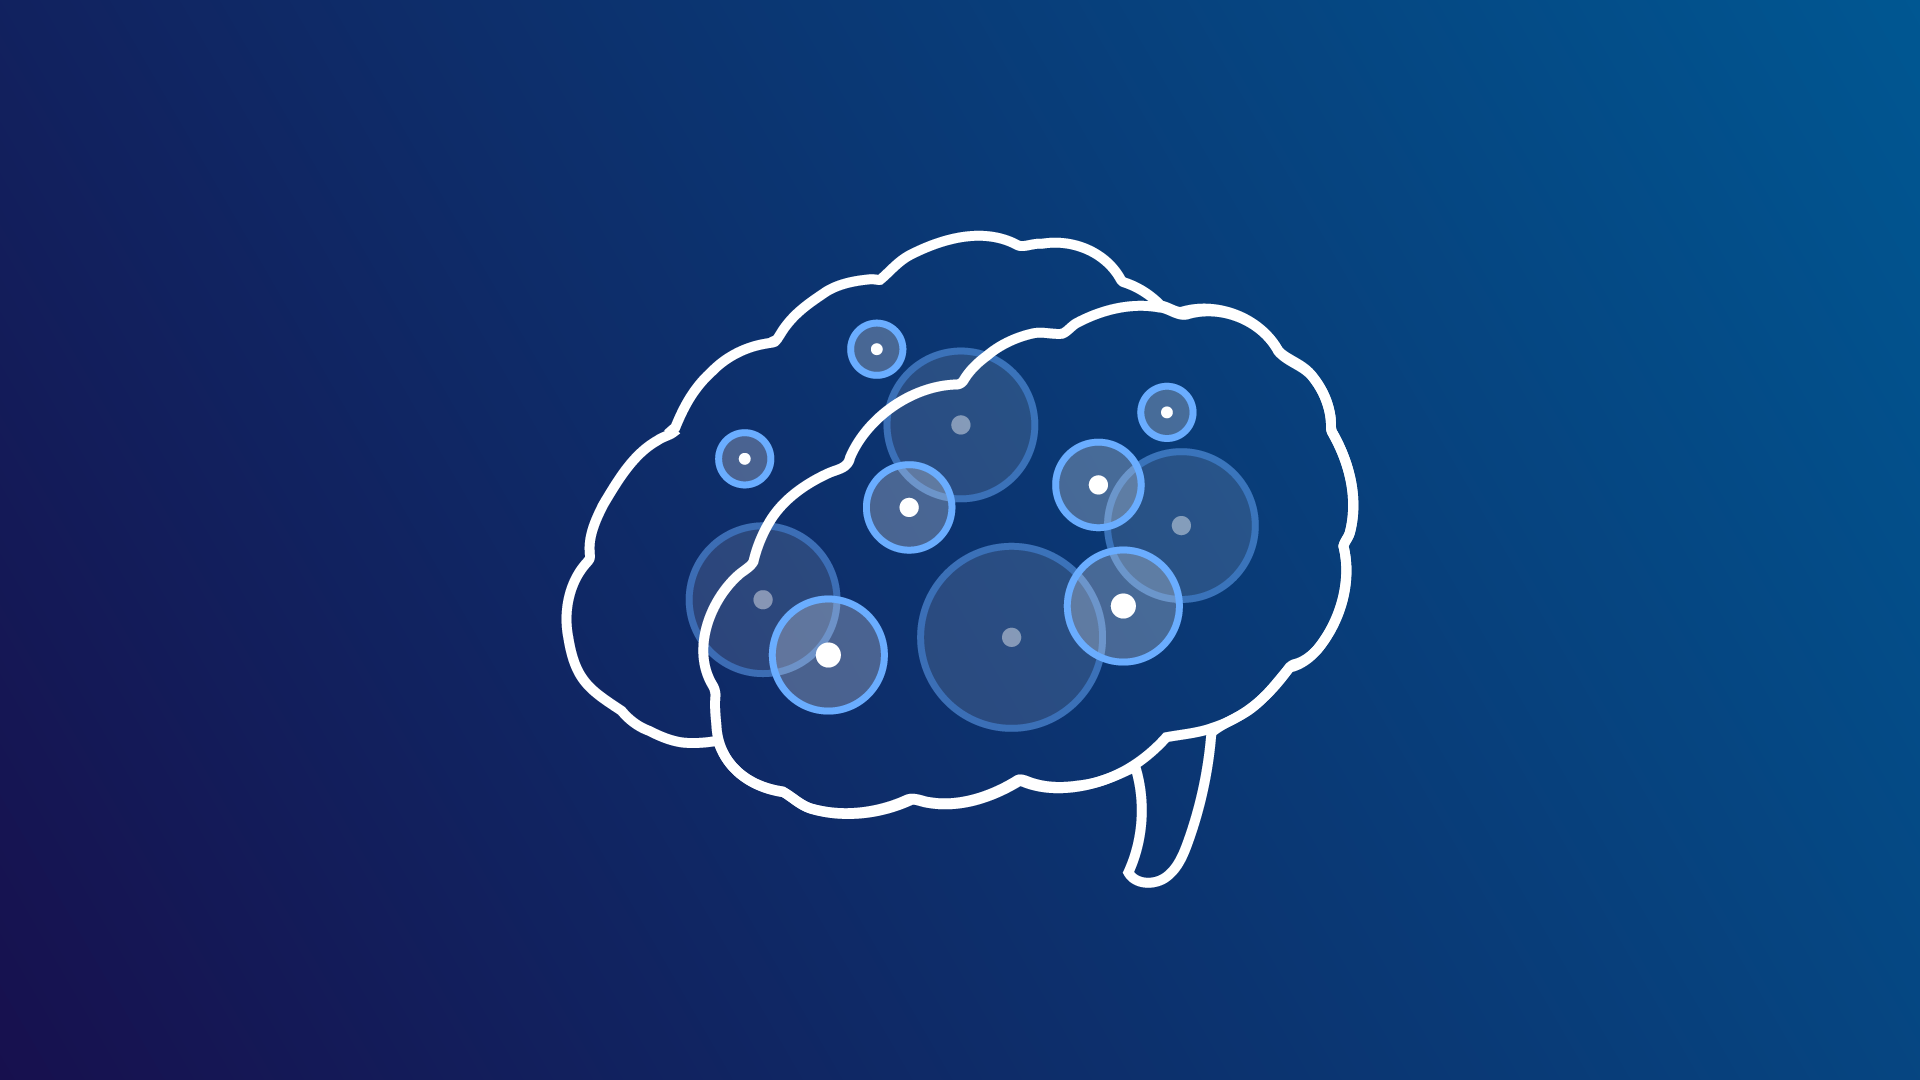 Silhouette of a brain with vector icons floating inside against a blue background